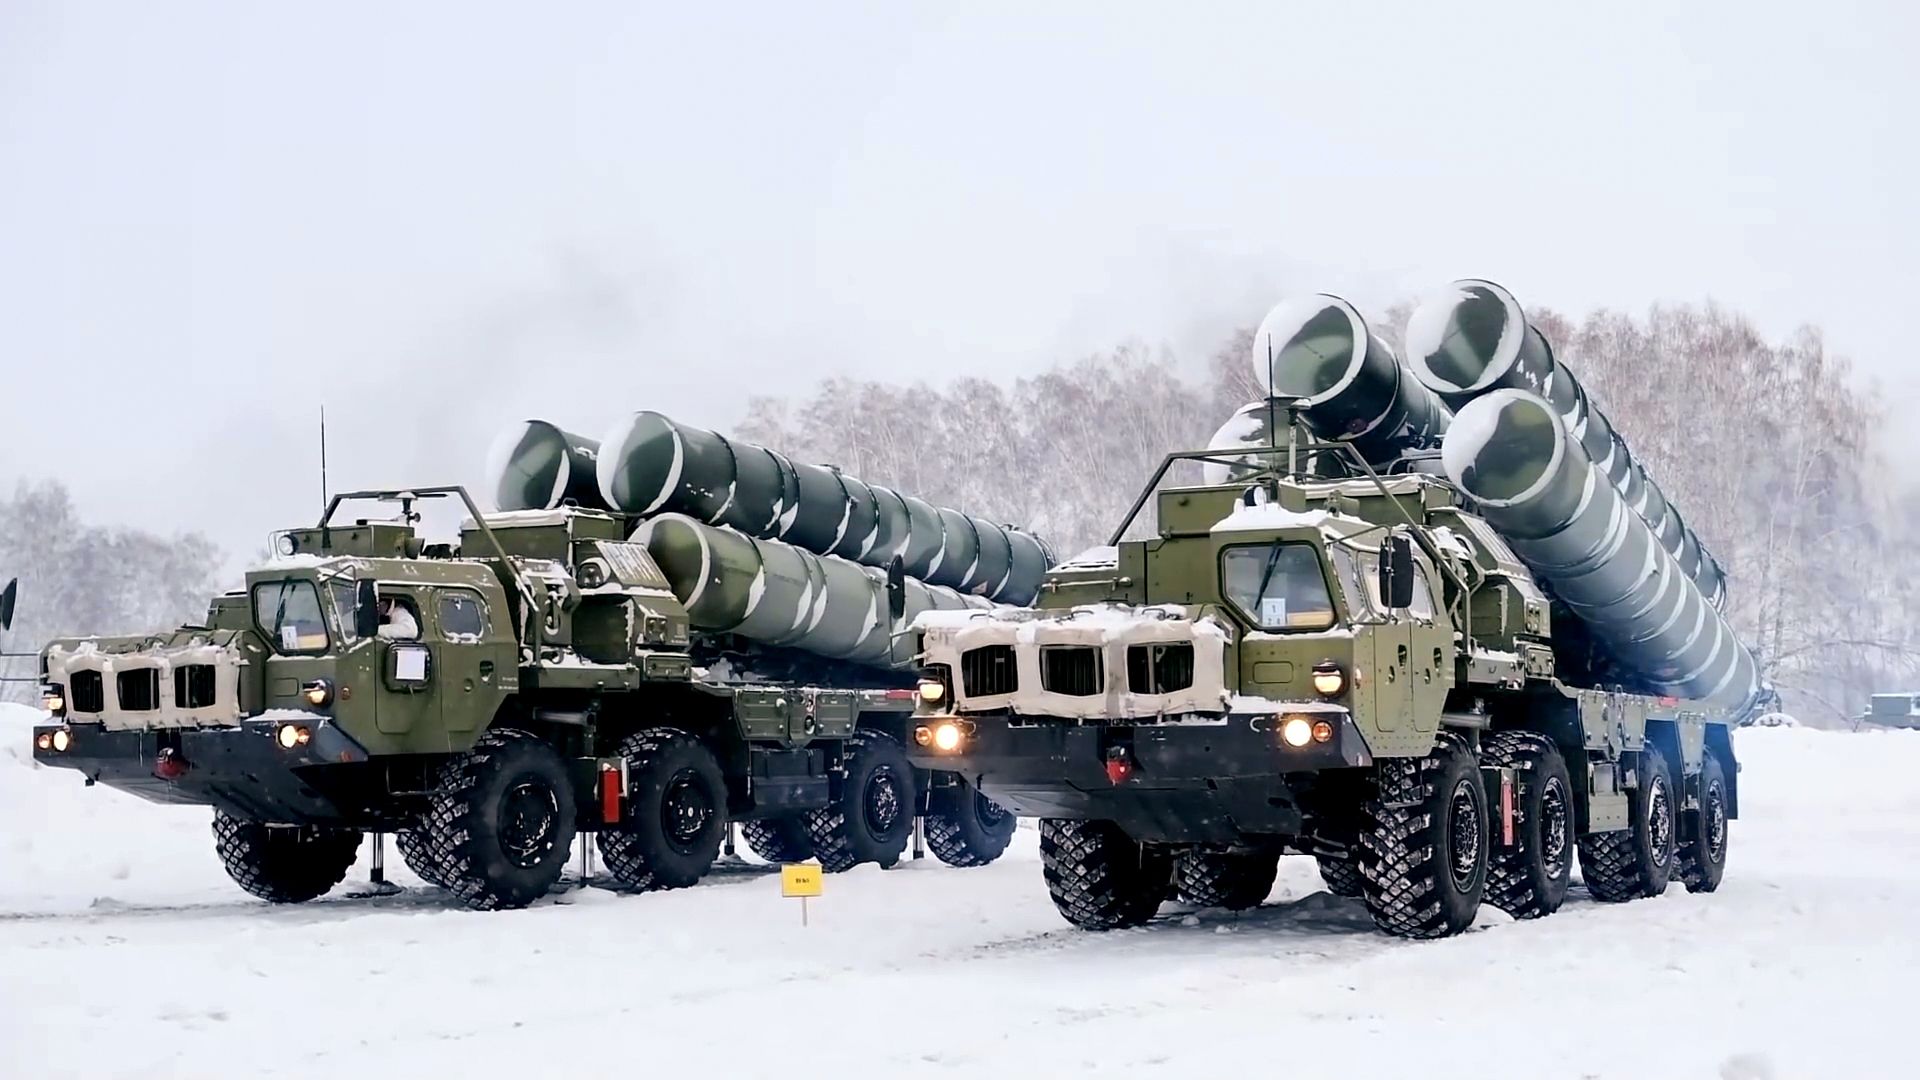 Russian S-400 missile defense systems